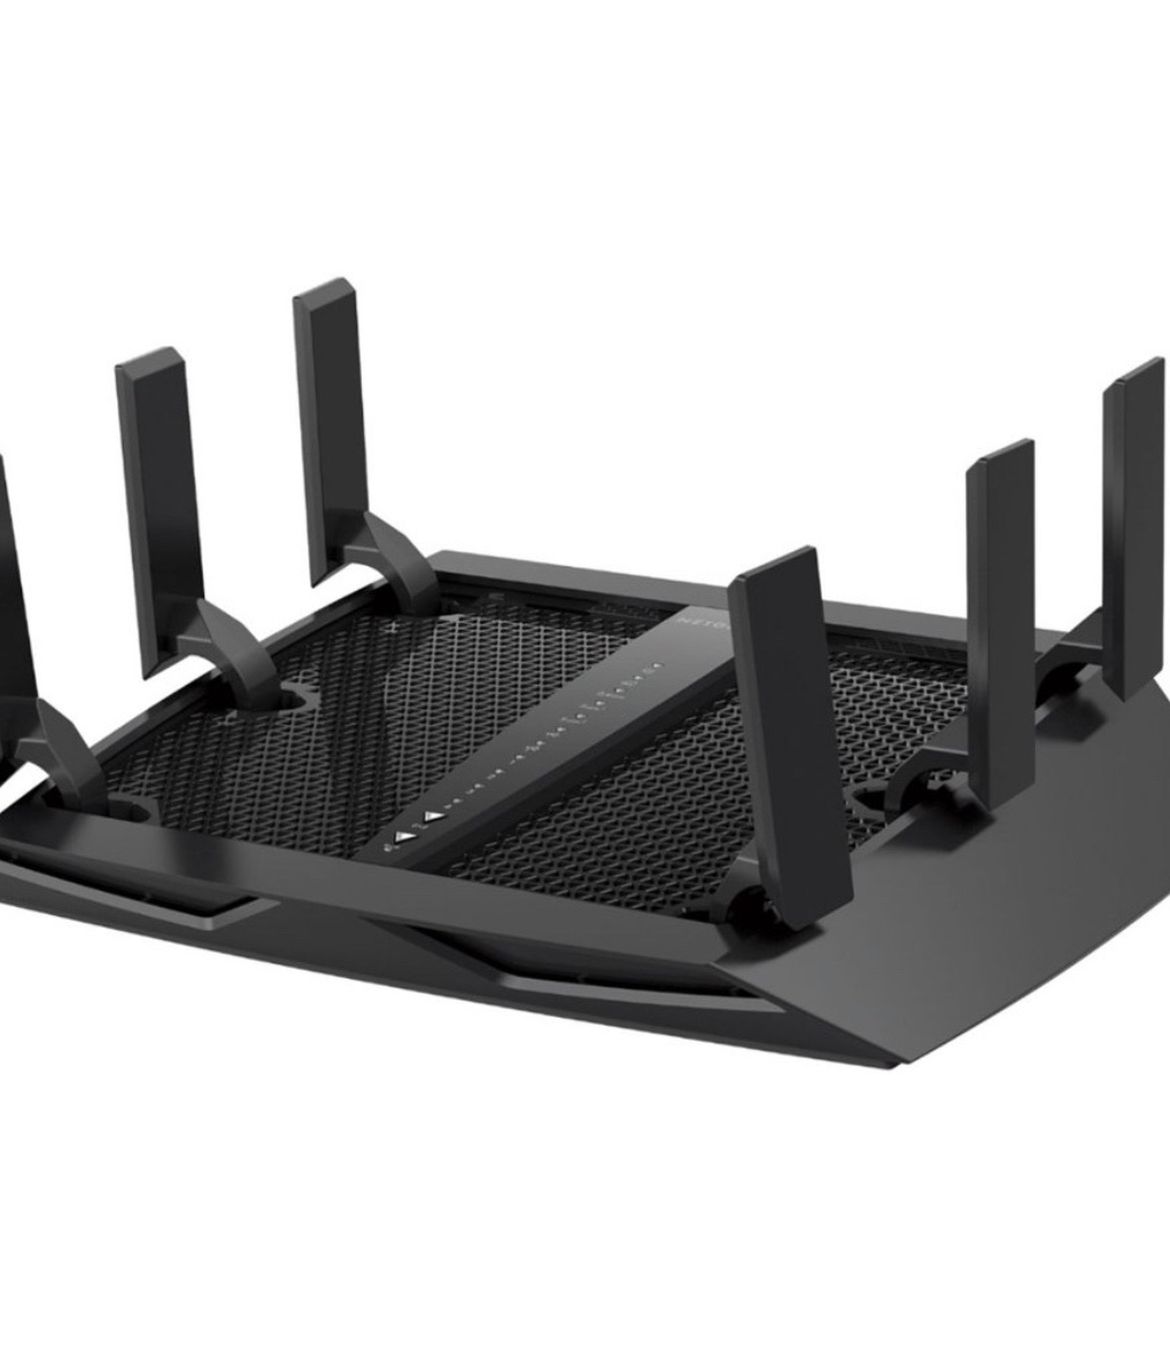 Netgear Nighthawk X6 AC 3200 Tri band WiFi 5 Router. Great condition paid over $400 new